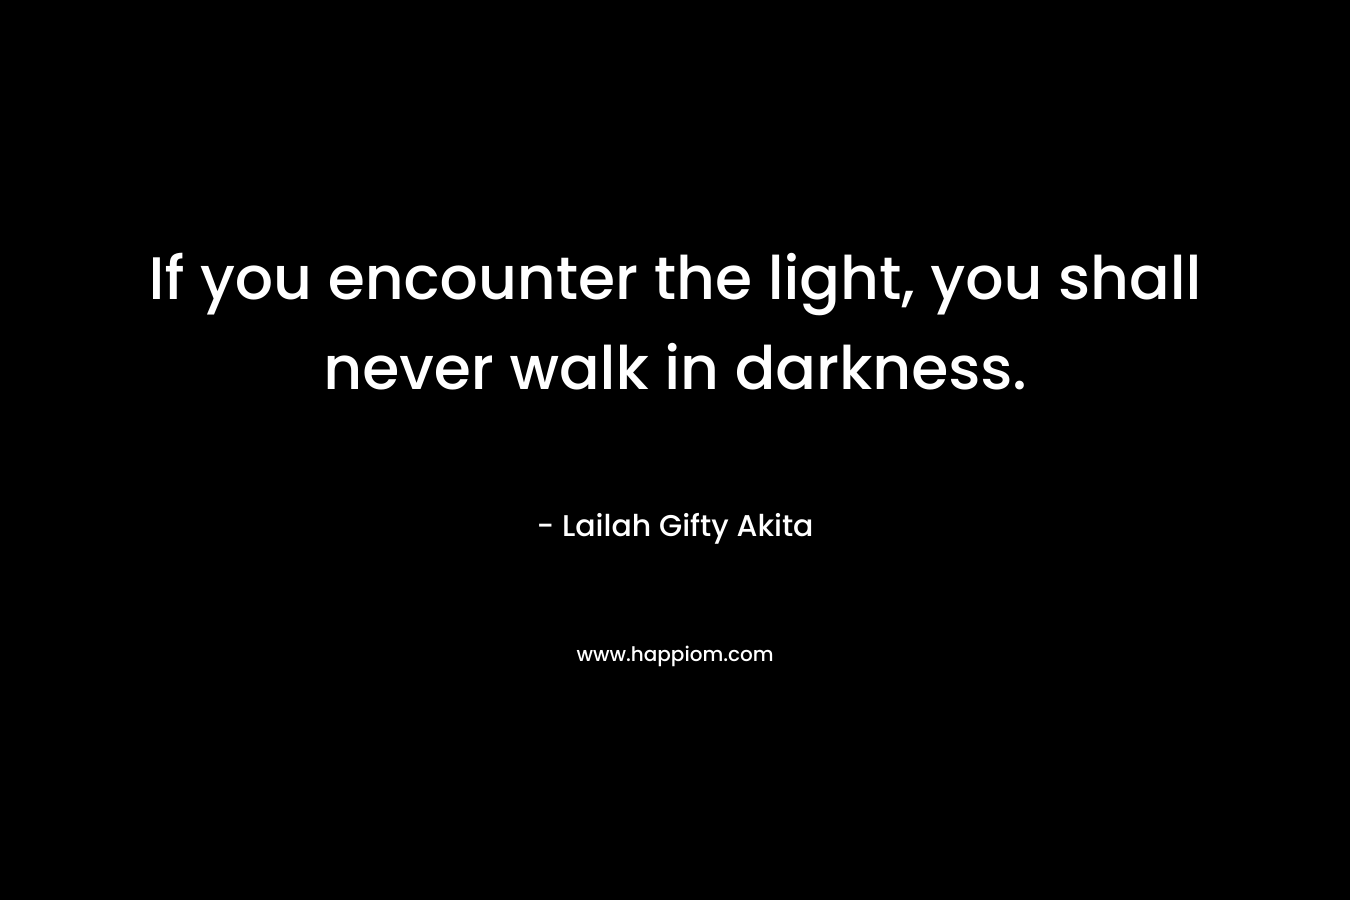 If you encounter the light, you shall never walk in darkness.